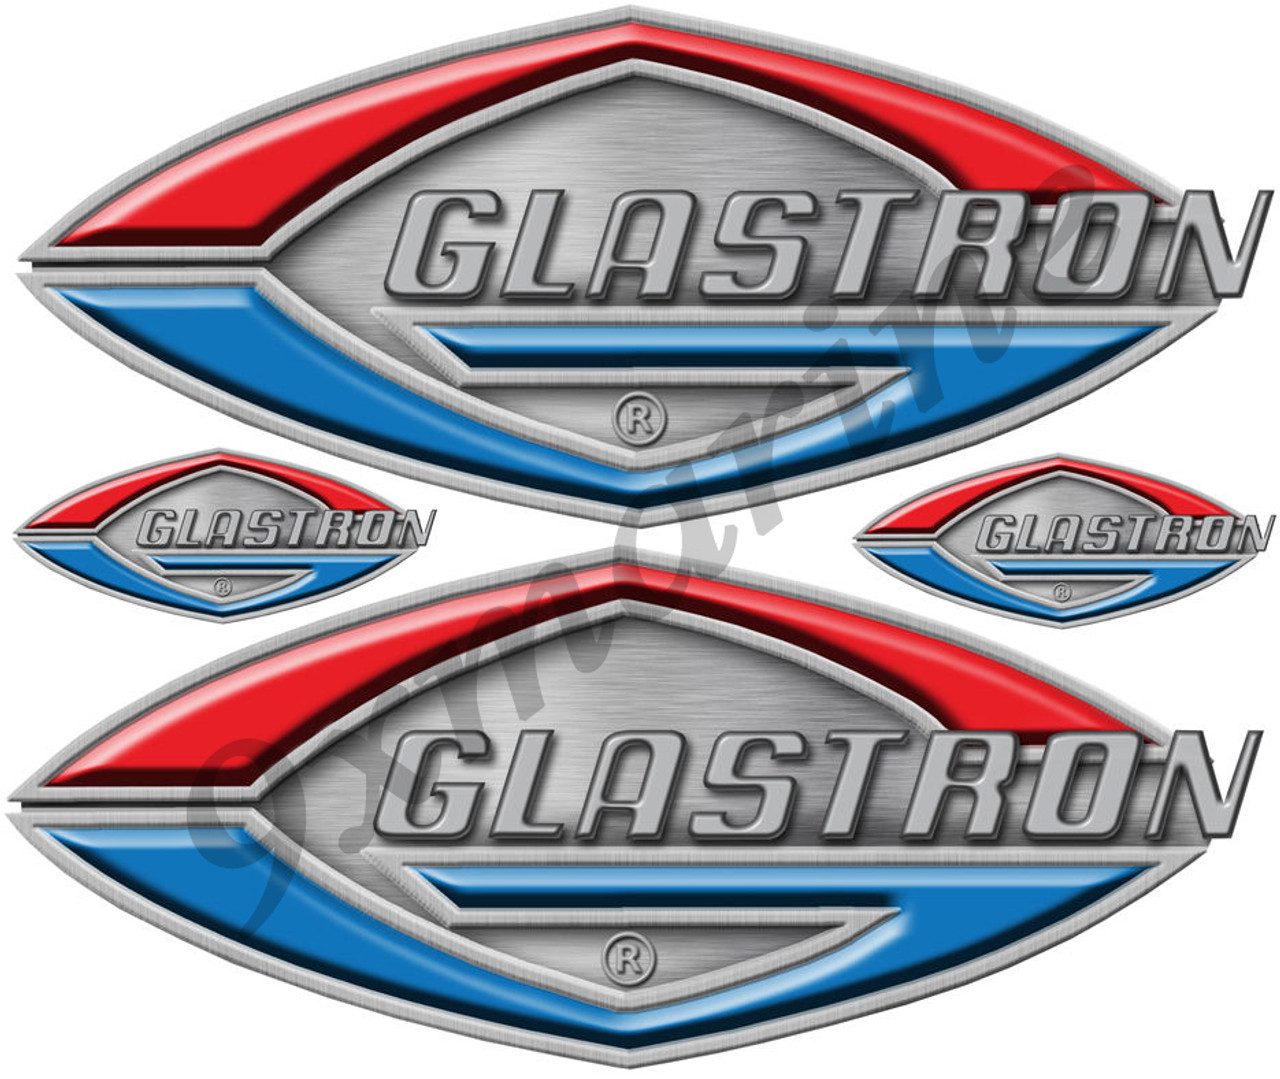 Glastron 4 Vintage Boat Stickers. Remastered stickers for boat restoration